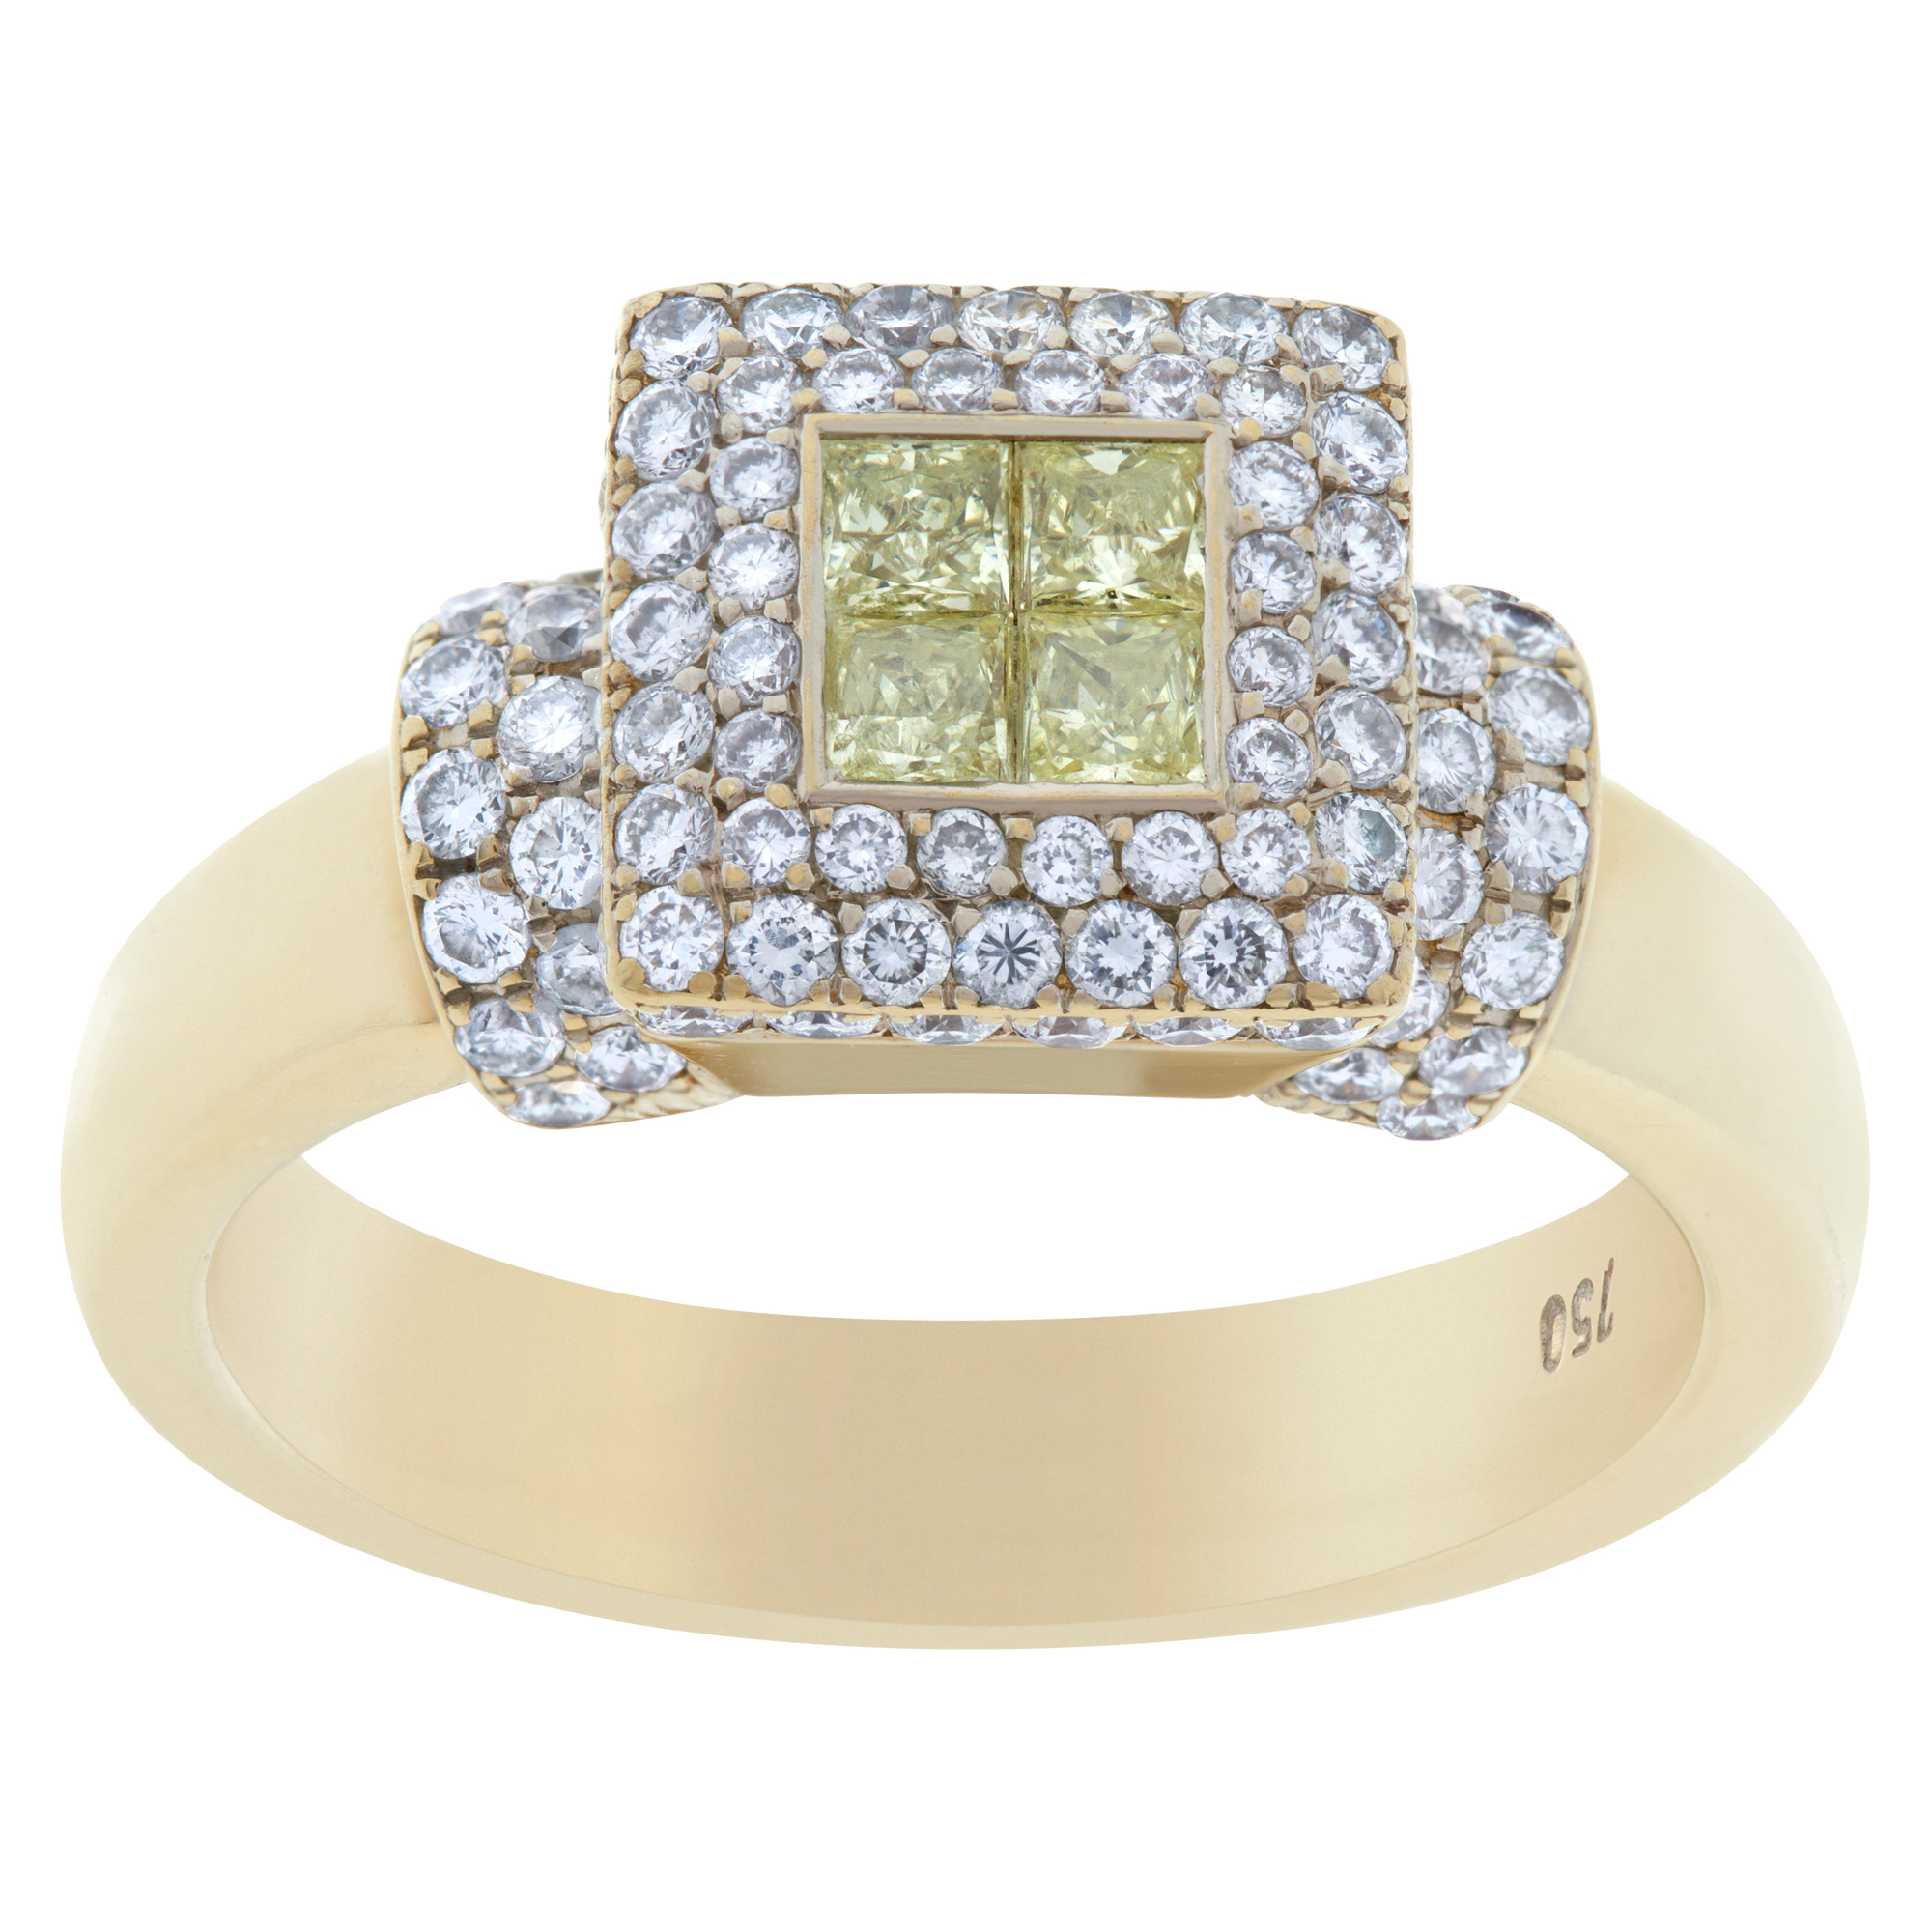 White & Yellow Diamond Ring In 18k White Gold. Approx 1 Ct In Diamonds. Size 6 1/4. image 1